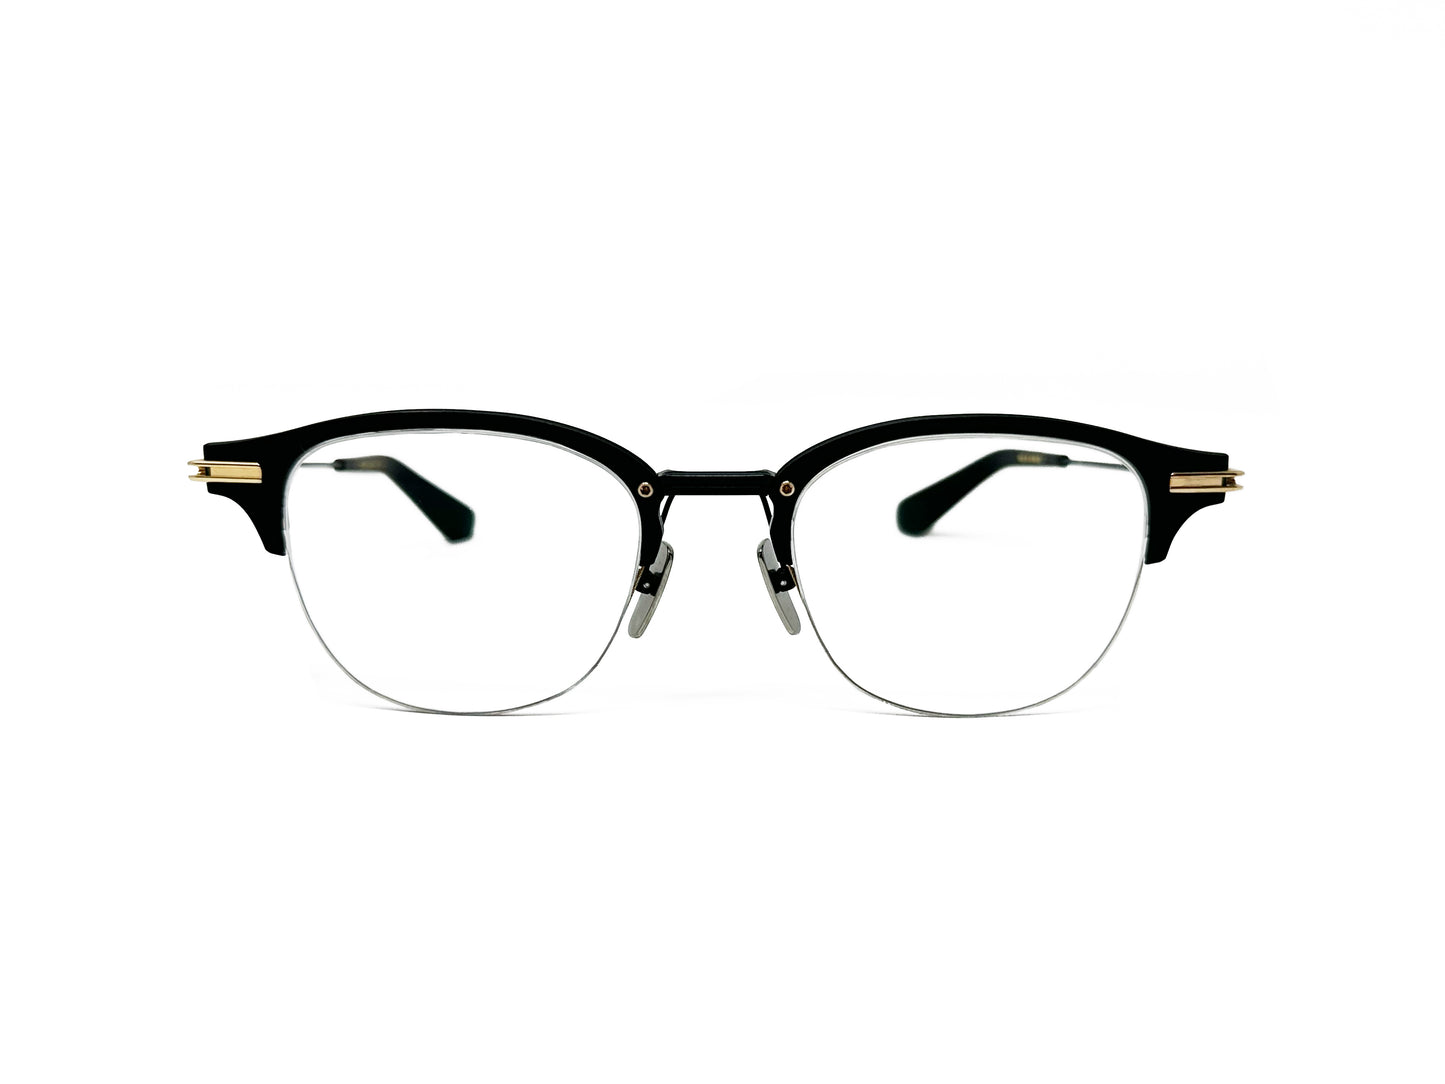 Dita Eyewear half-rim, clubmaster-style, metal, optical frame. Model: Iambic. Color: 03 - Black and gold. Front view.